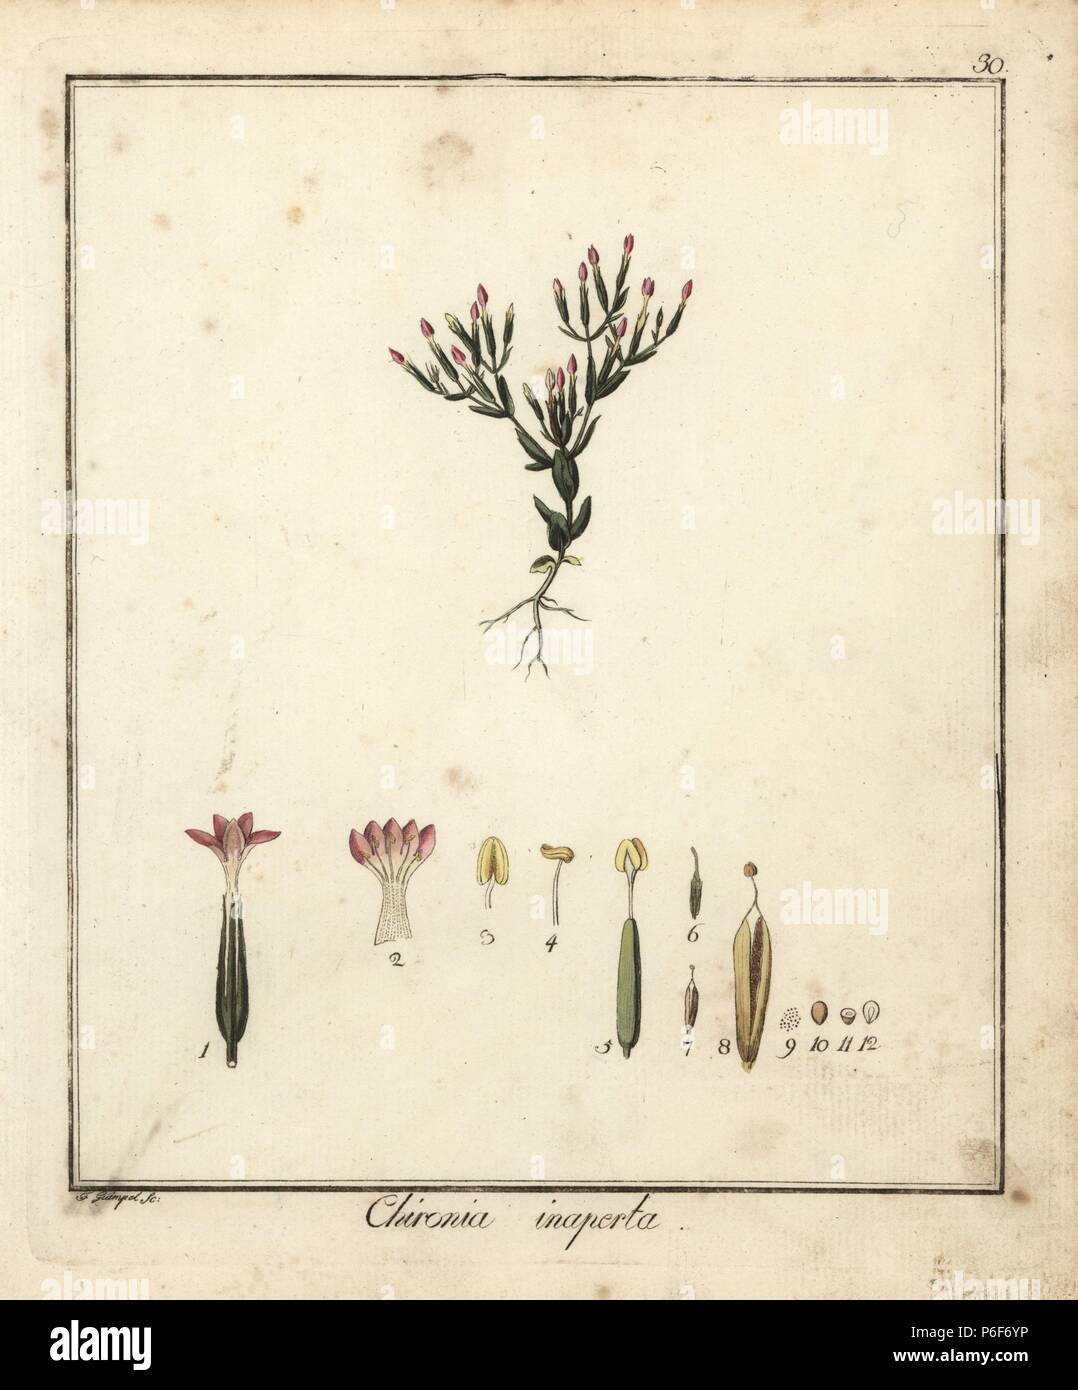 Lesser centaury, Centaurium pulchellum. Handcoloured copperplate engraving by F. Guimpel from Dr. Friedrich Gottlob Hayne's Medical Botany, Berlin, 1822. Hayne (1763-1832) was a German botanist, apothecary and professor of pharmaceutical botany at Berlin University. Stock Photo